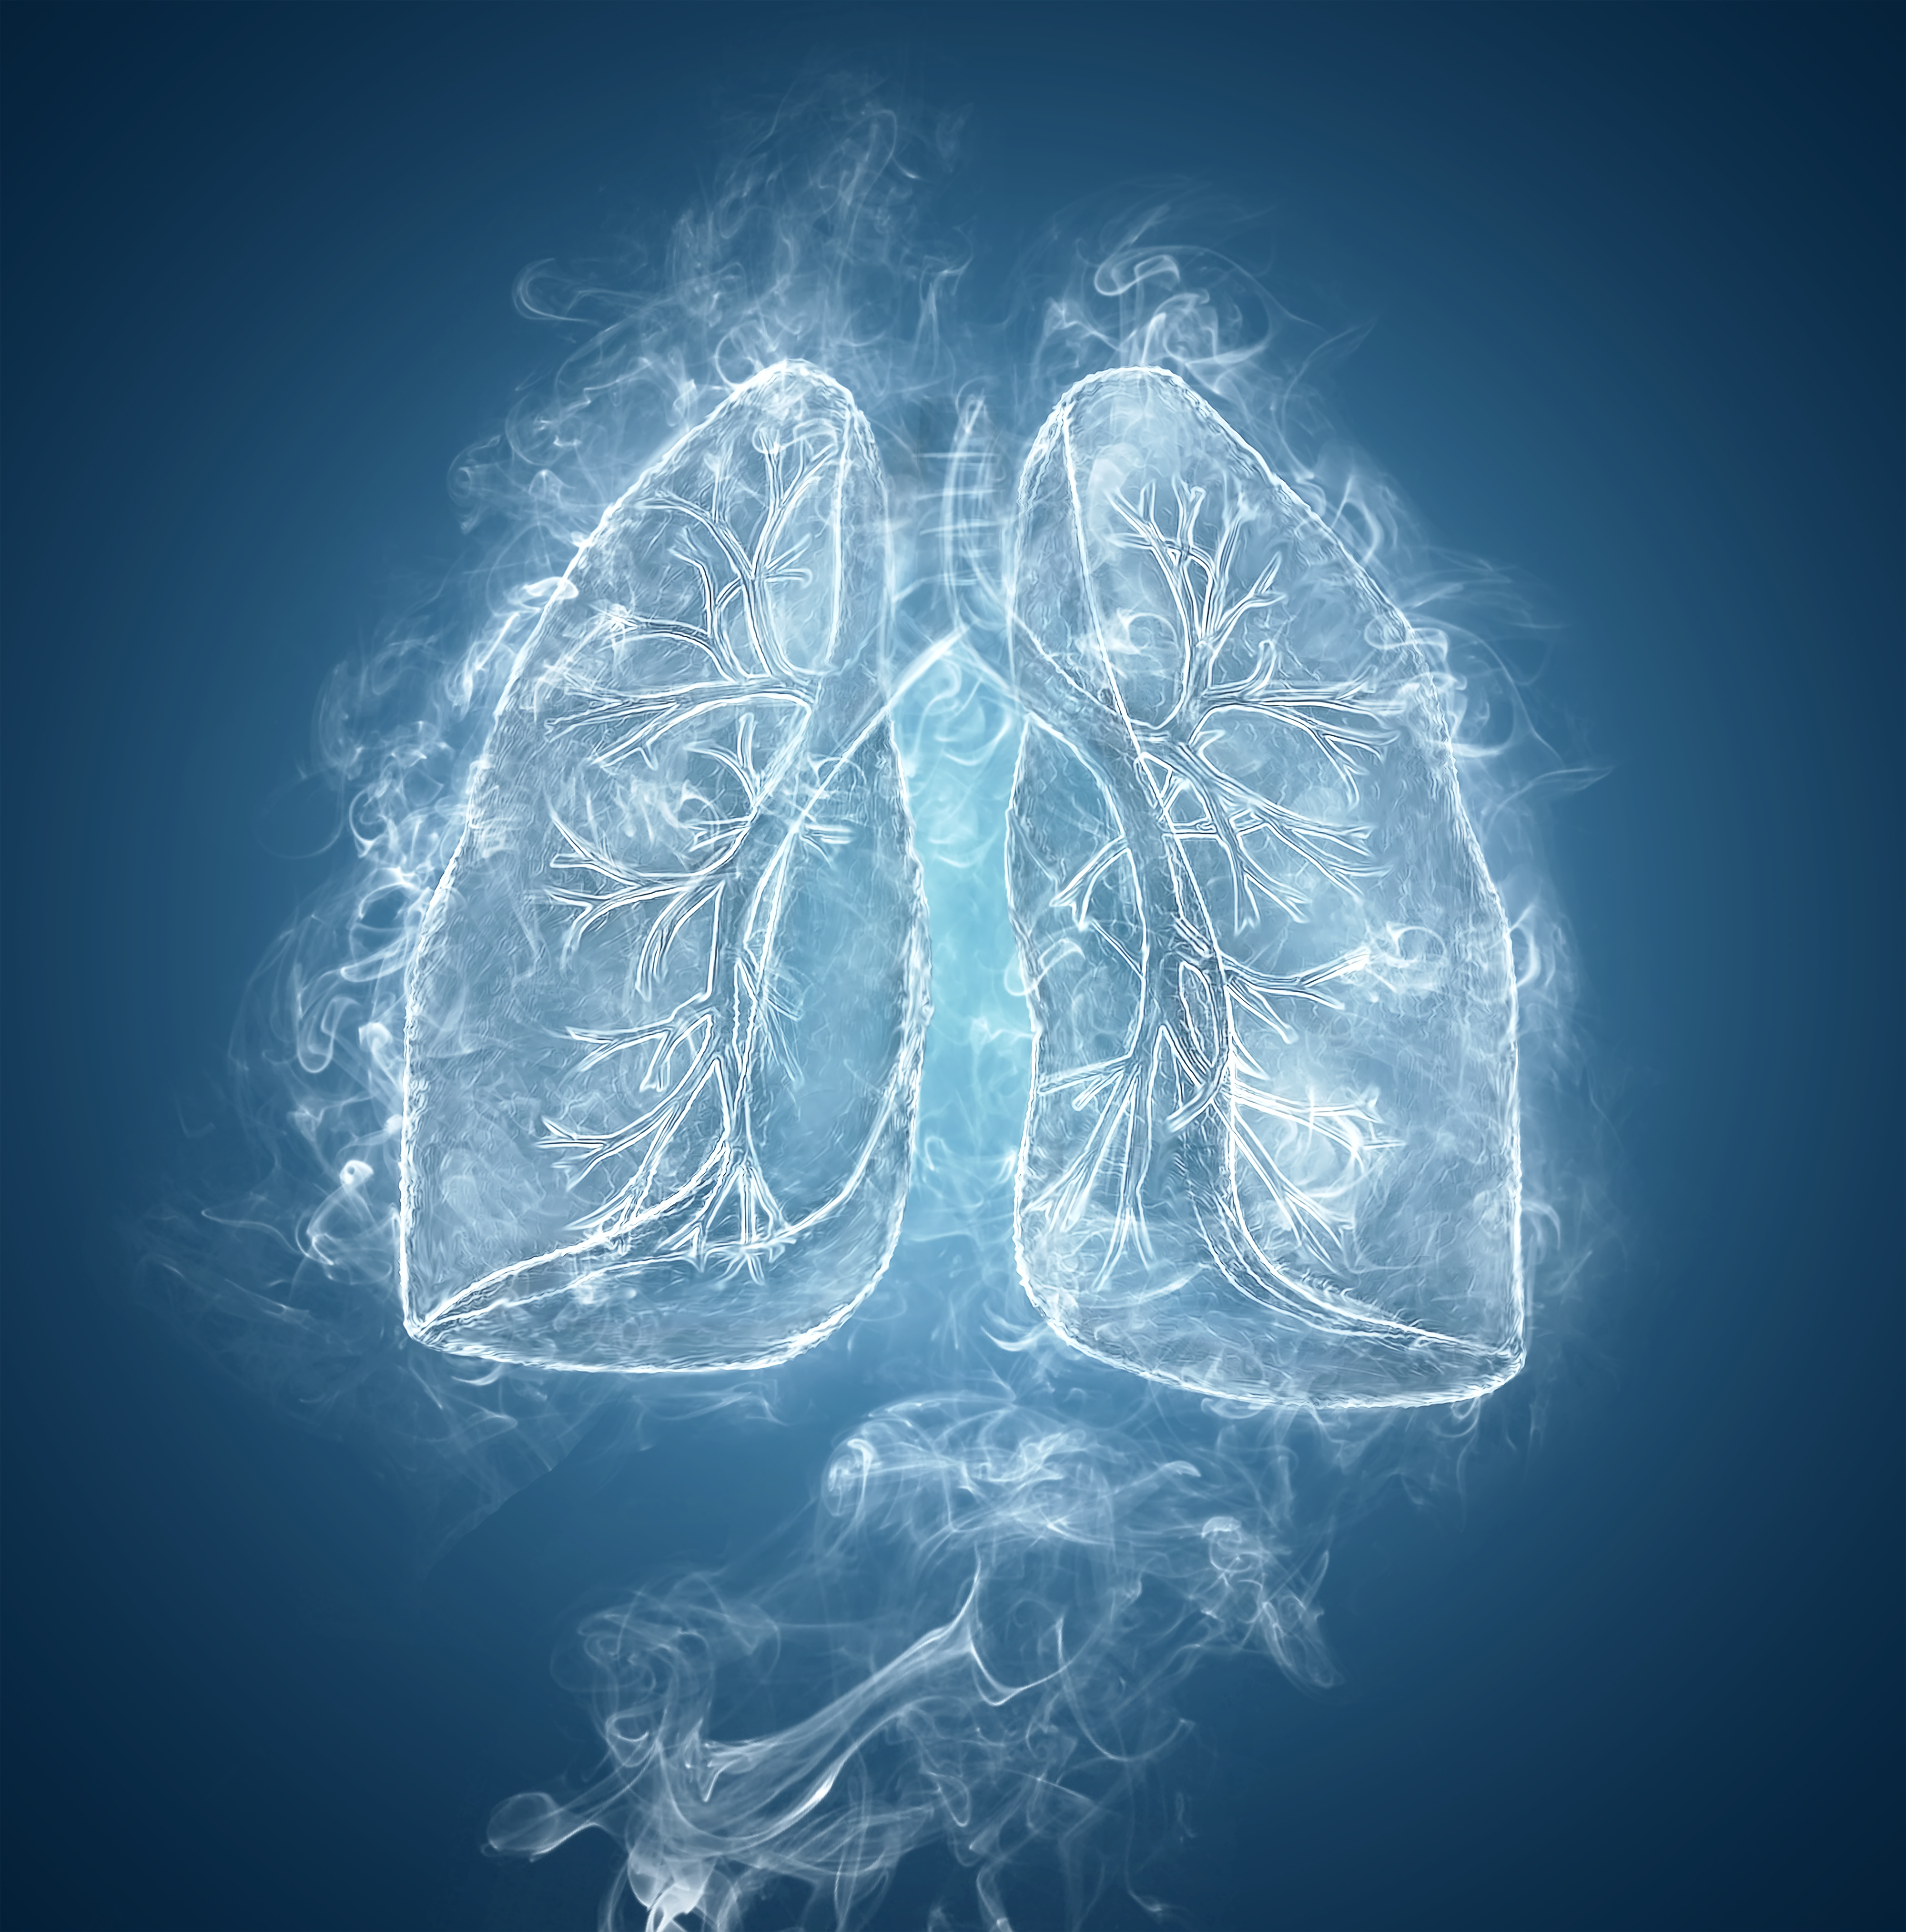 Nonin Medical’s COPD STEP™ Plan Set to be implemented in U.S hospitals This Month